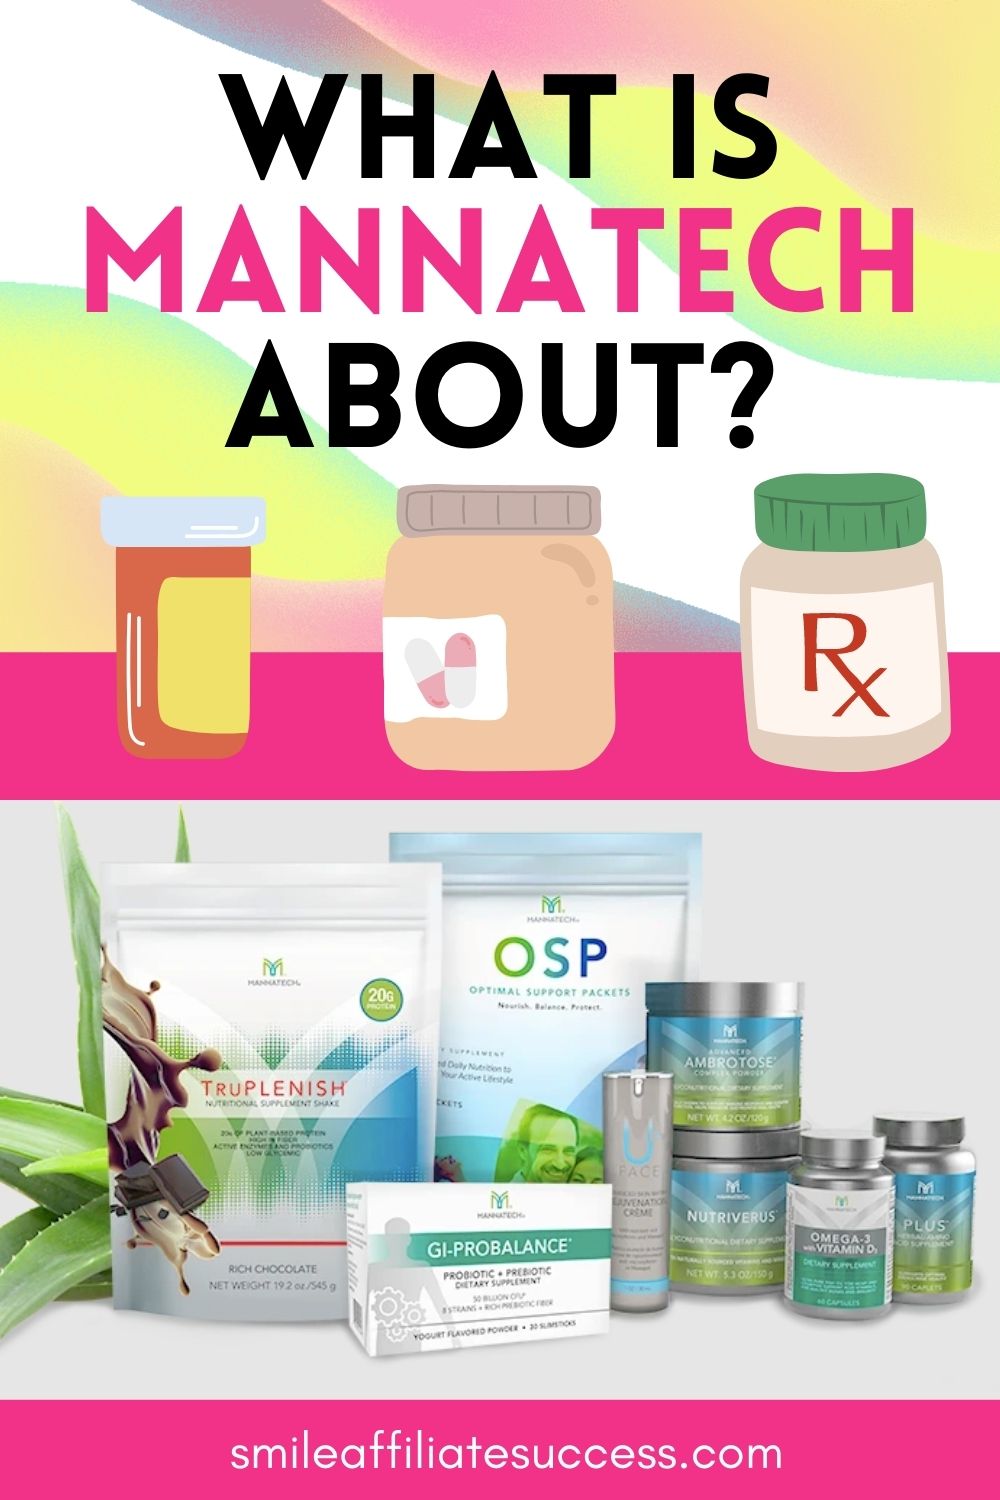 What Is Mannatech About?